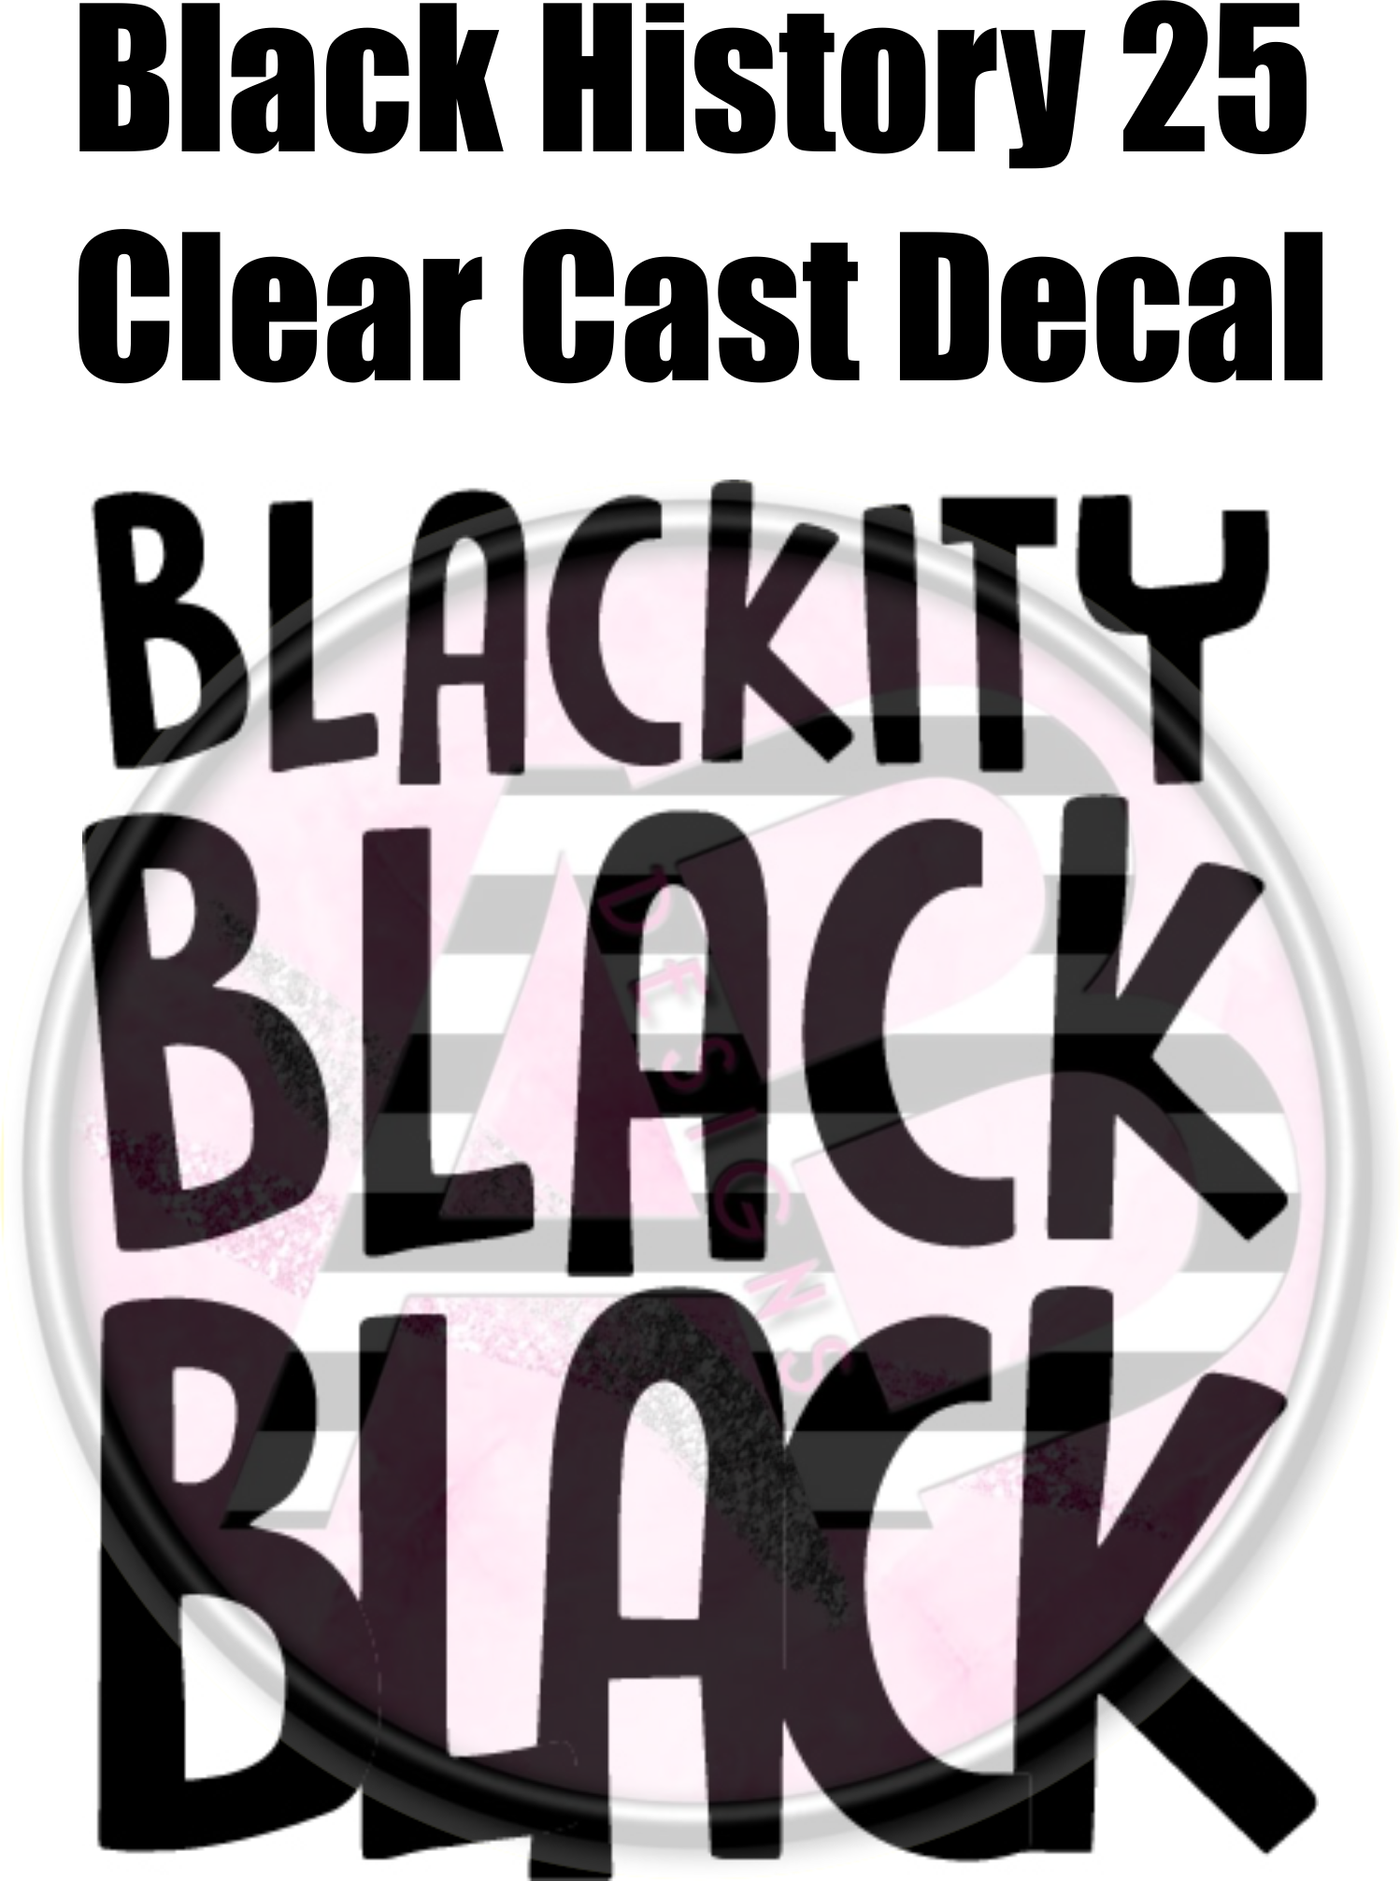 Black History 25 - Clear Cast Decal